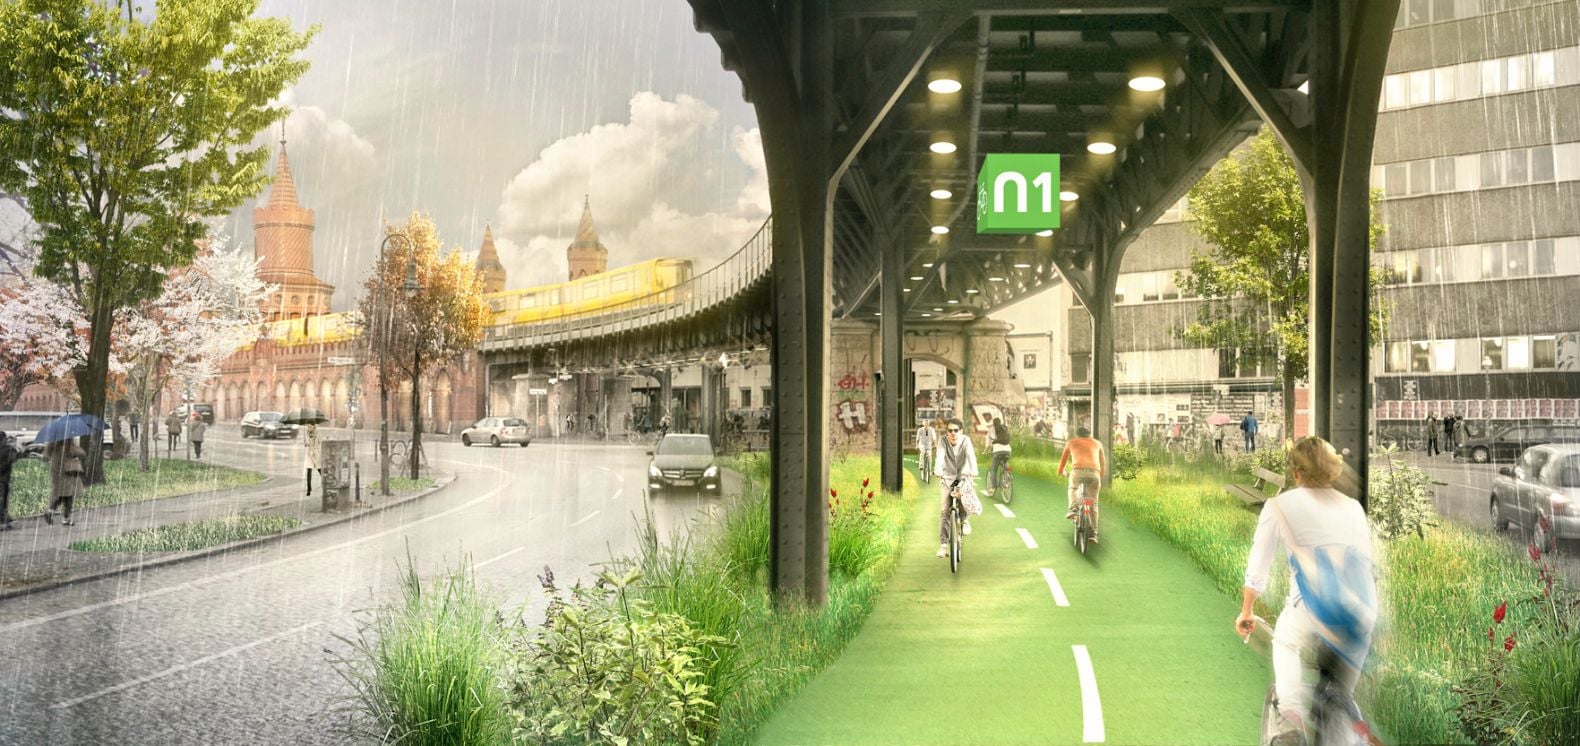 Renderings for an ultra-sustainable bike path running through the city of Berlin. 